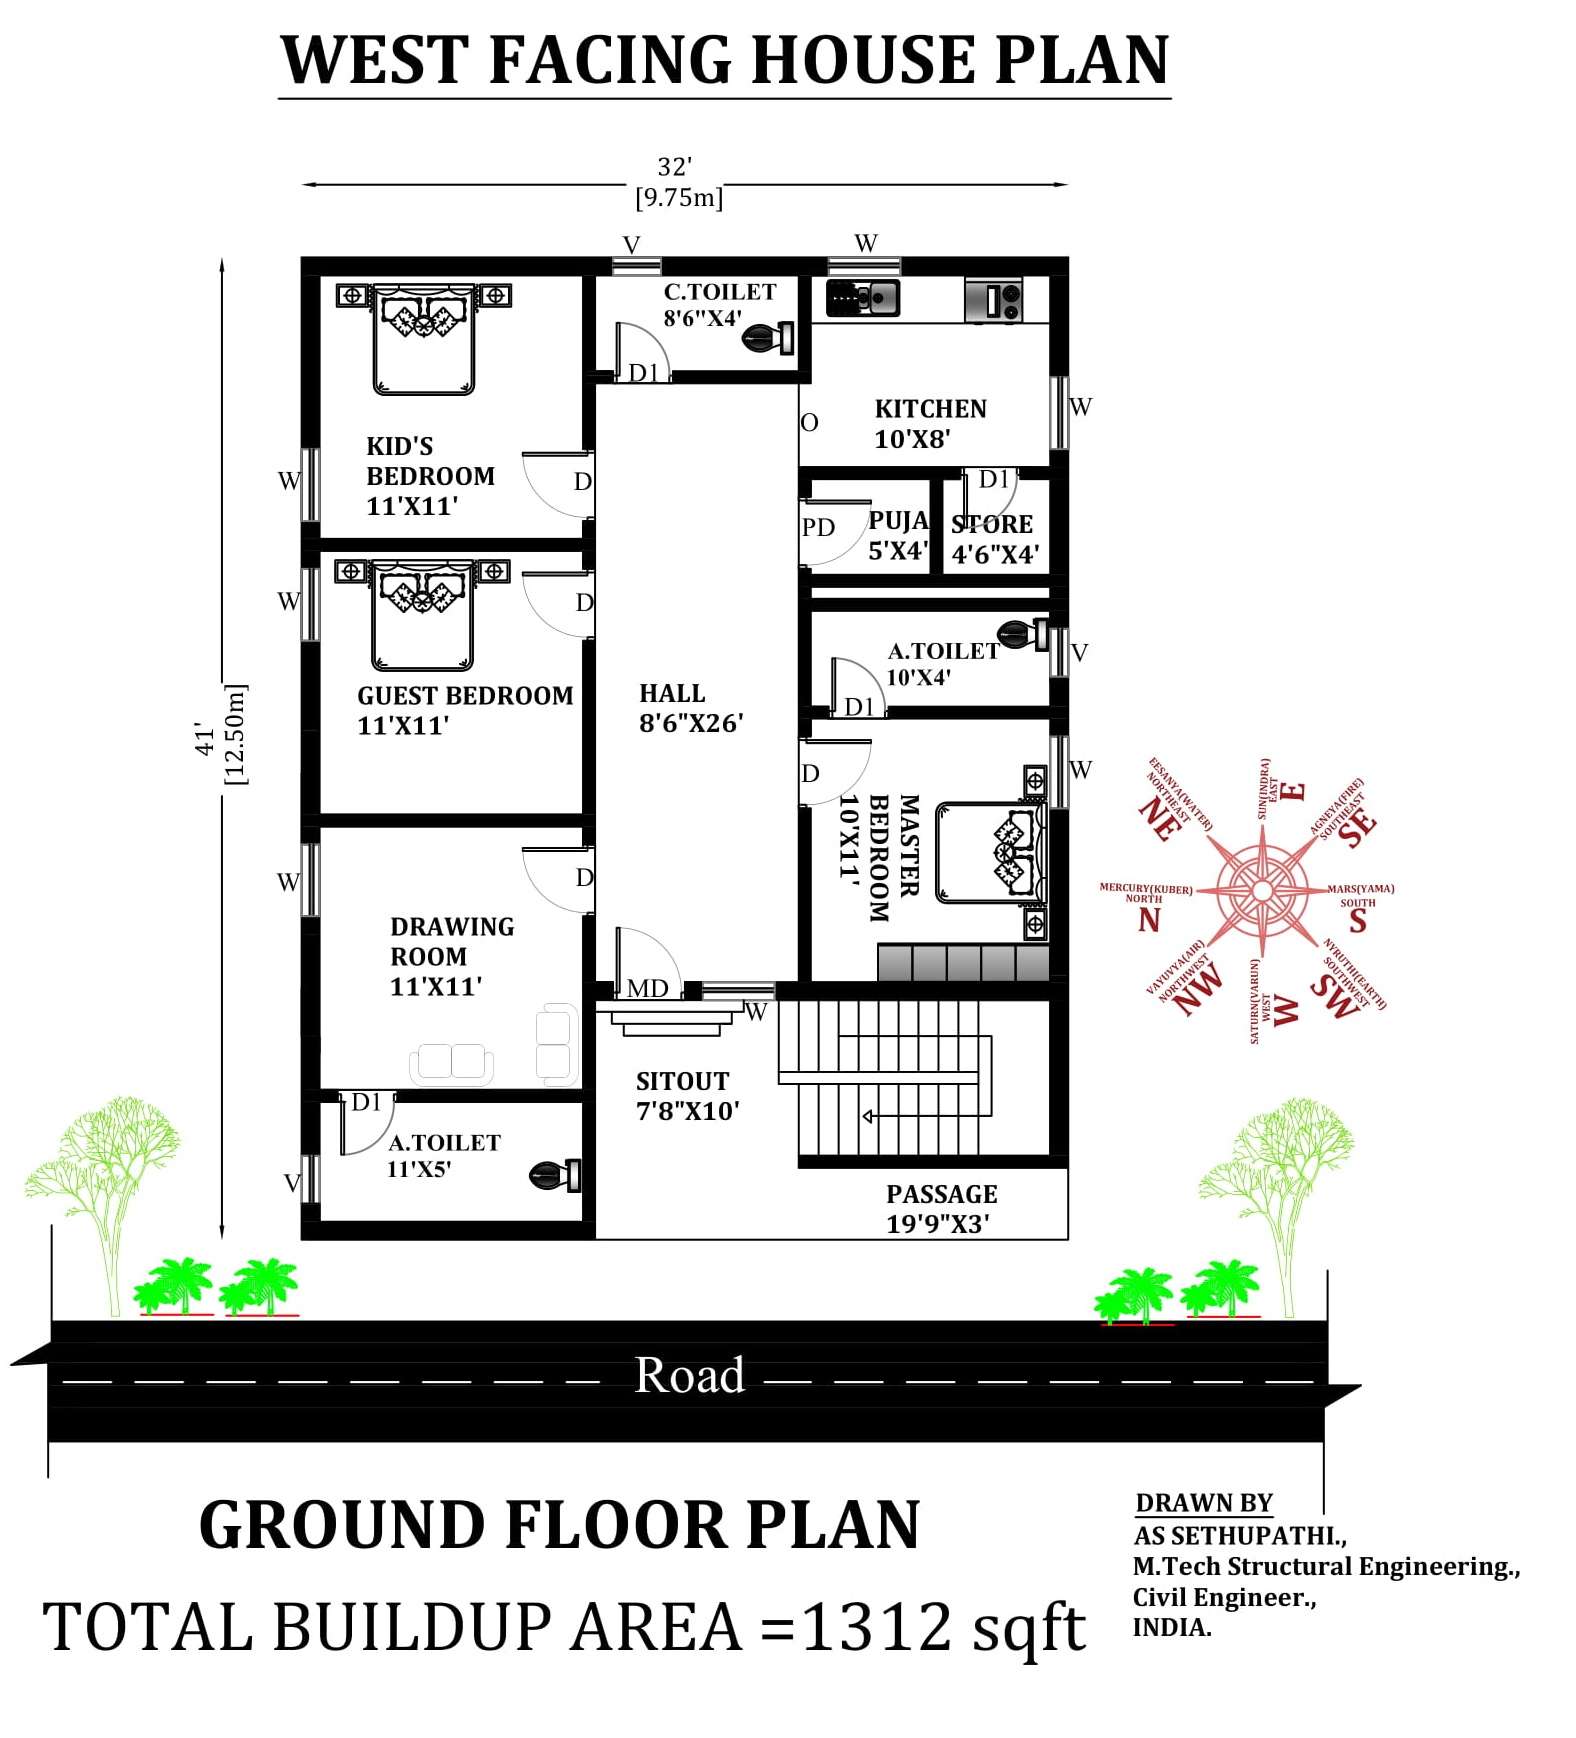 30x60 Feet West Facing House Plan 3bhk West Facing House Plan With ...